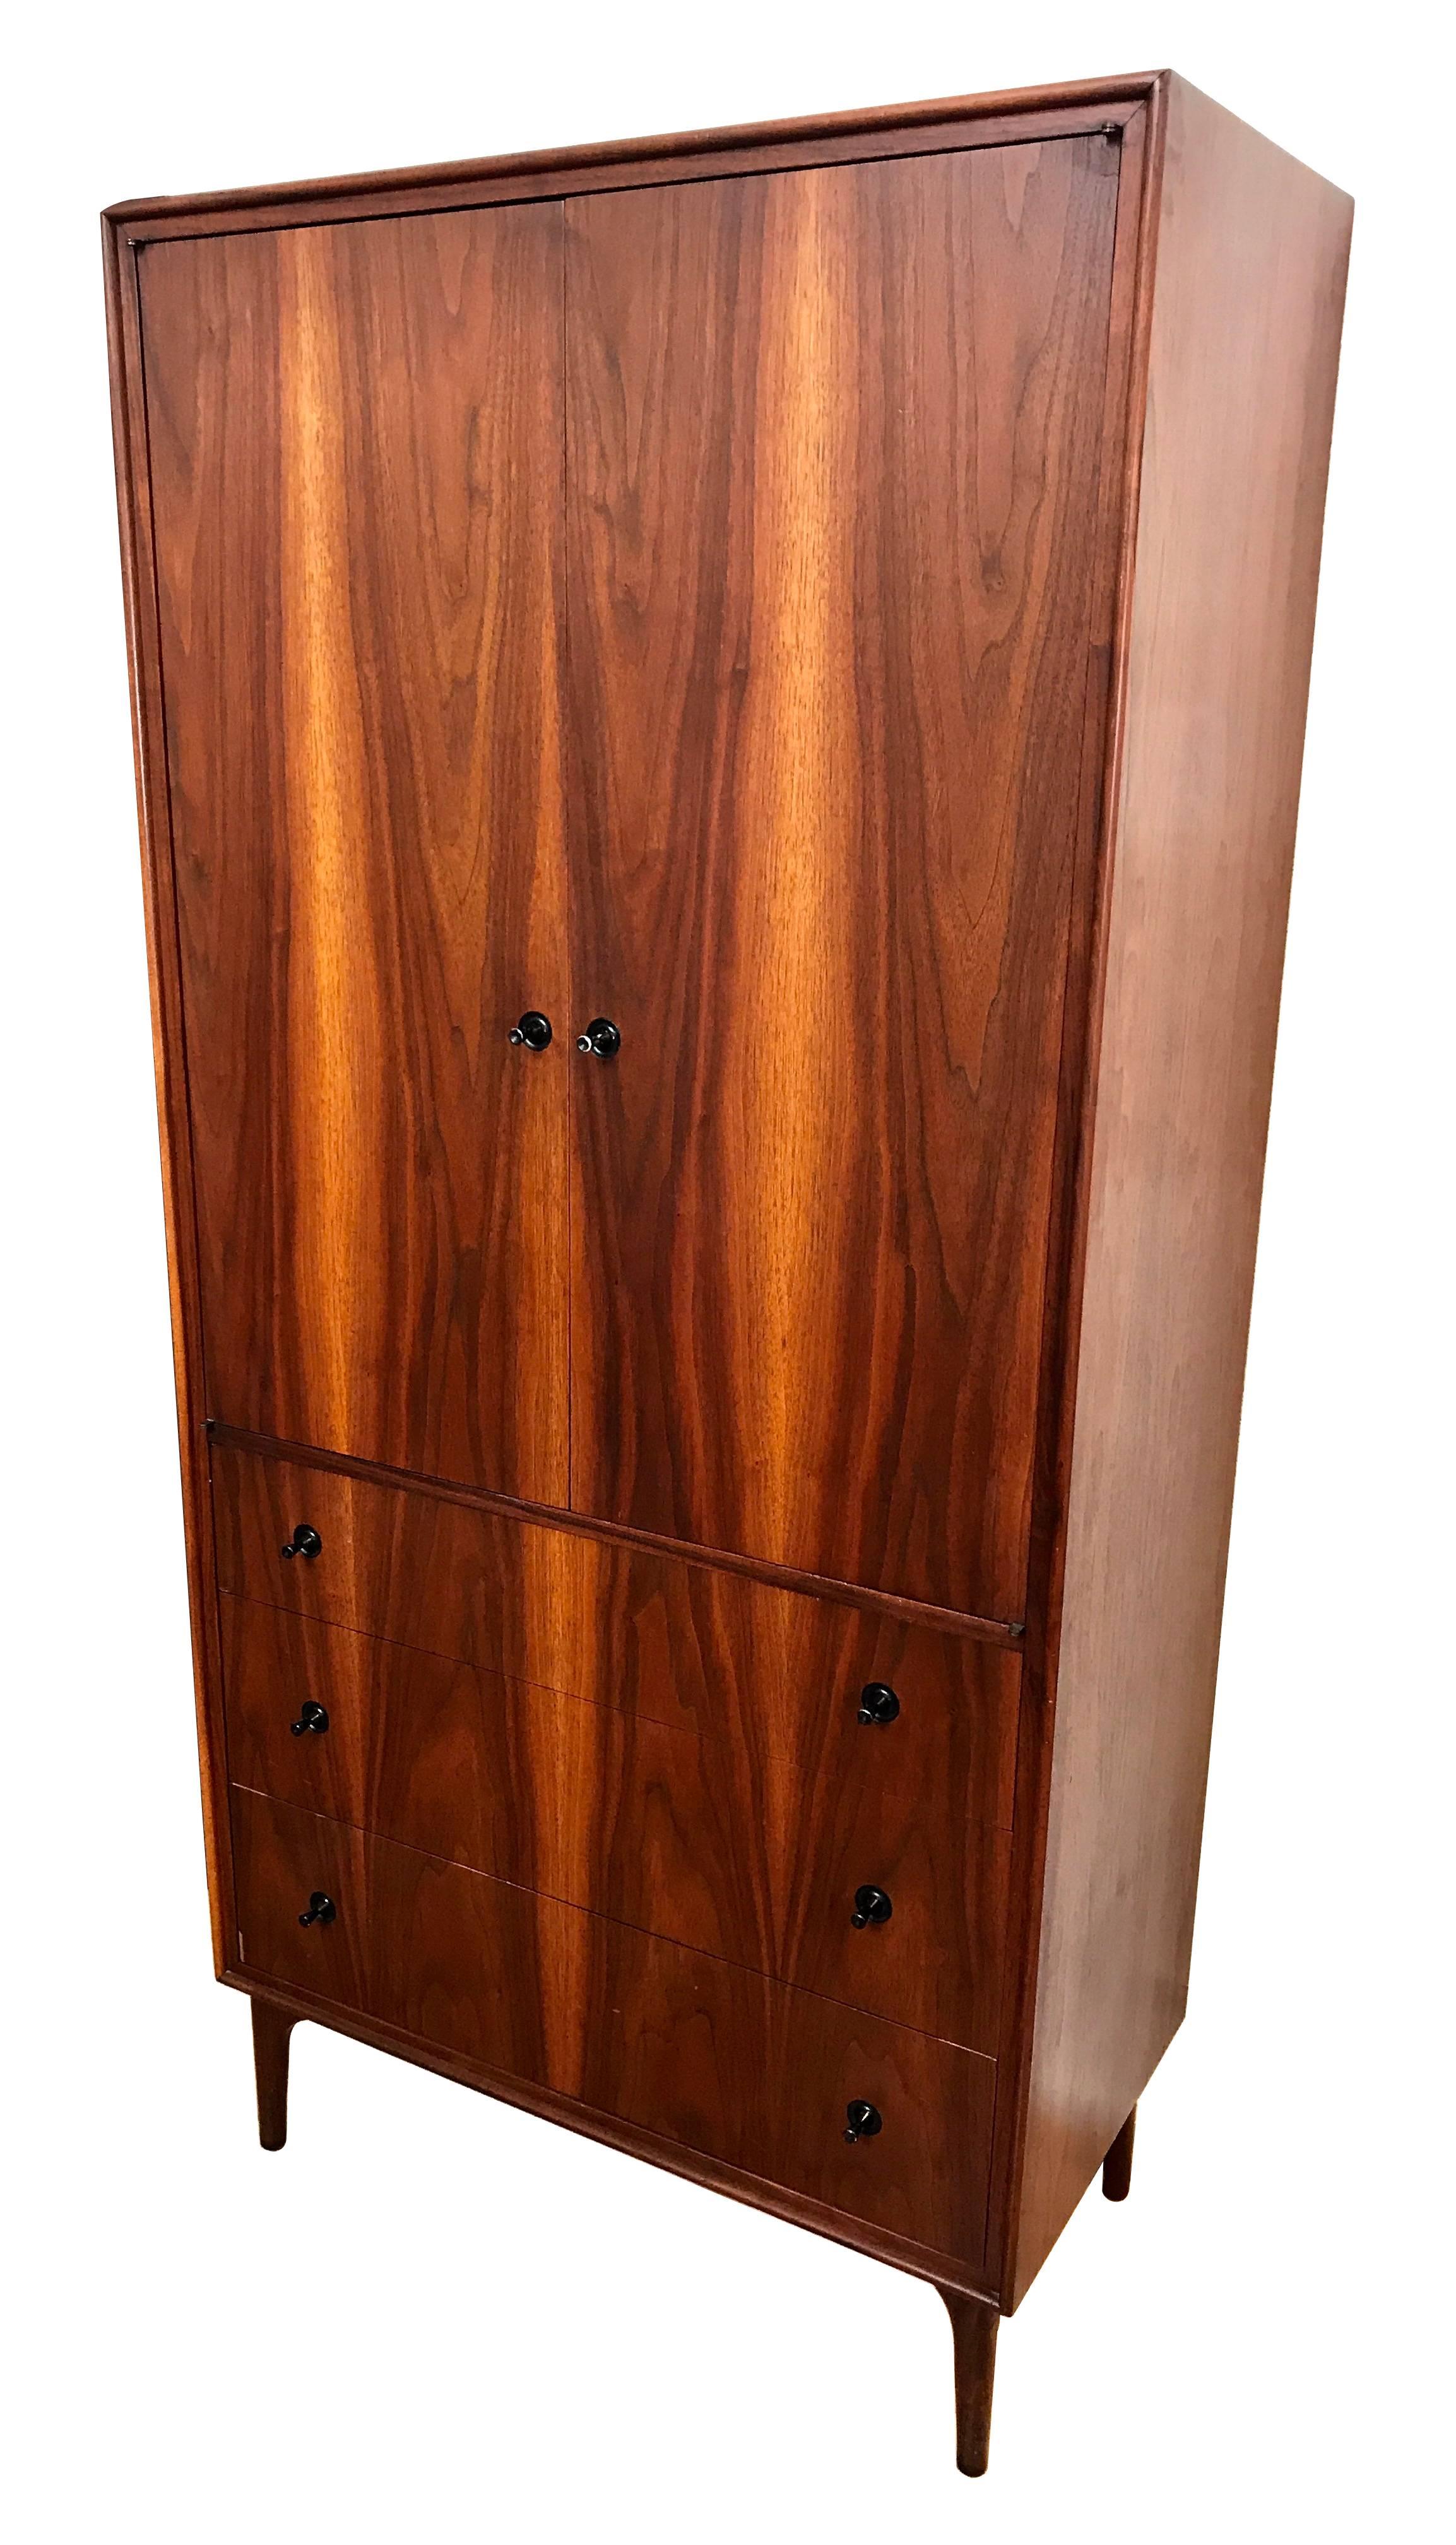 1950s tall walnut gentleman's dresser designed by John Kapel for Glenn of California. The dresser top opens to reveal shelving, with three small drawers (one drawer is missing) and a locking drawer with key, as well as a mirror that swings out with